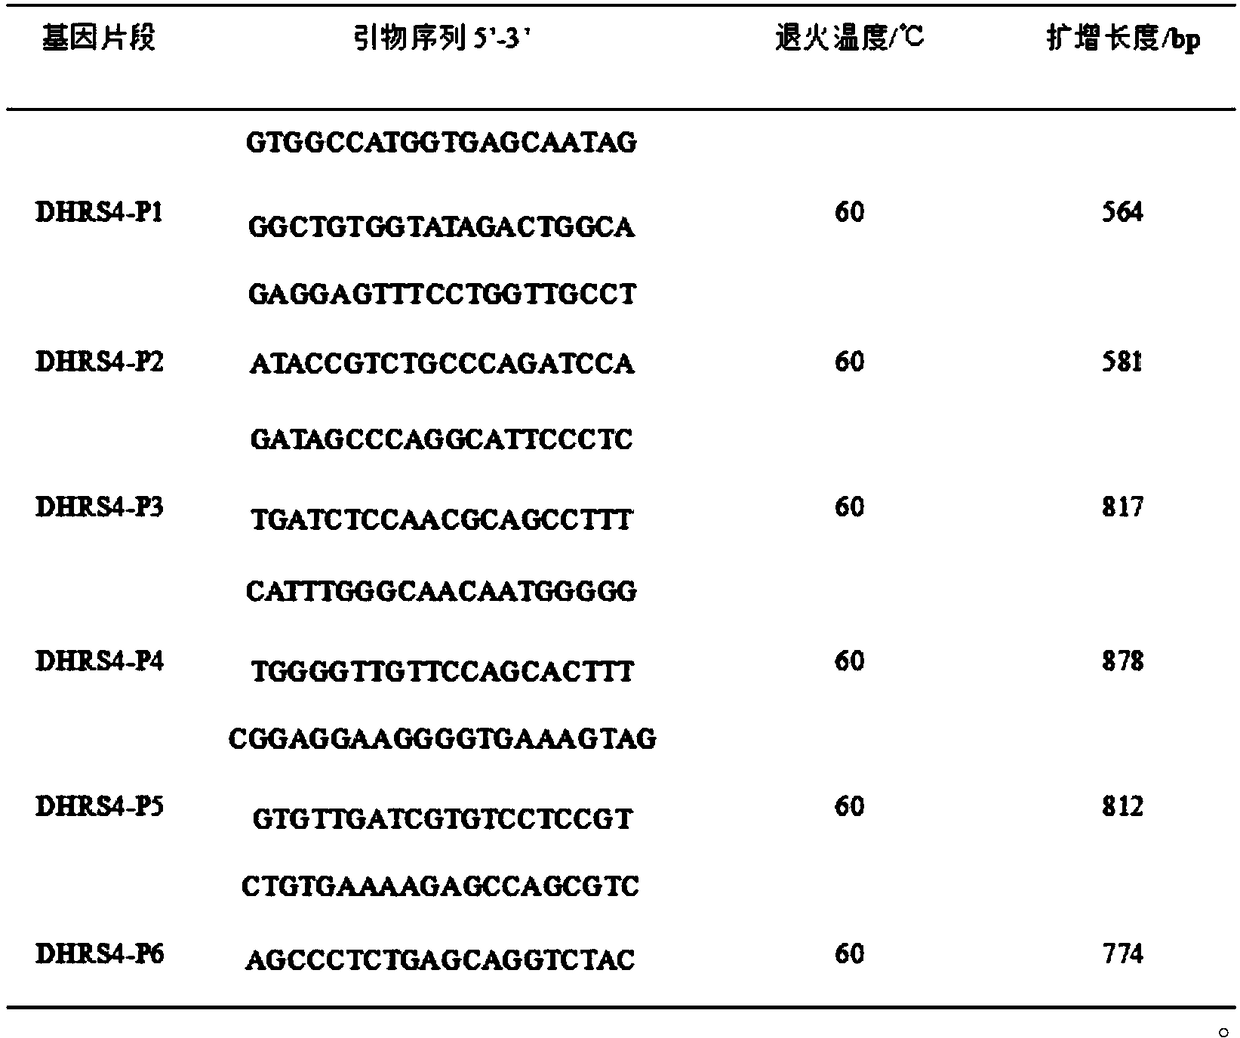 SNP molecular marker relevant to growth traits of large white pig and application of SNP molecular marker